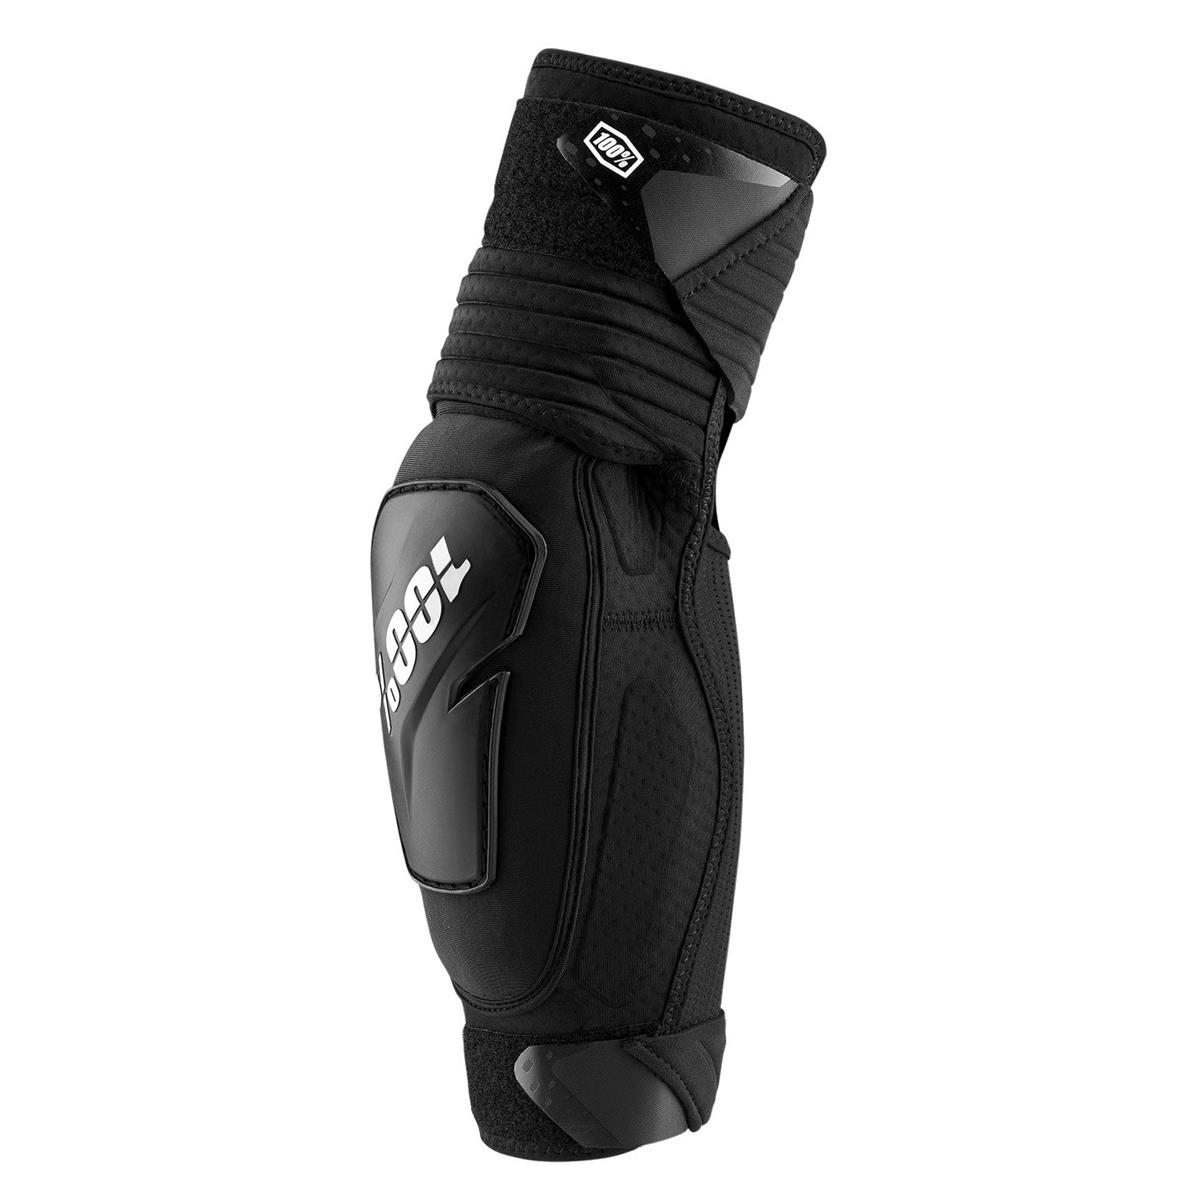 100% Elbow Guard Fortis Black